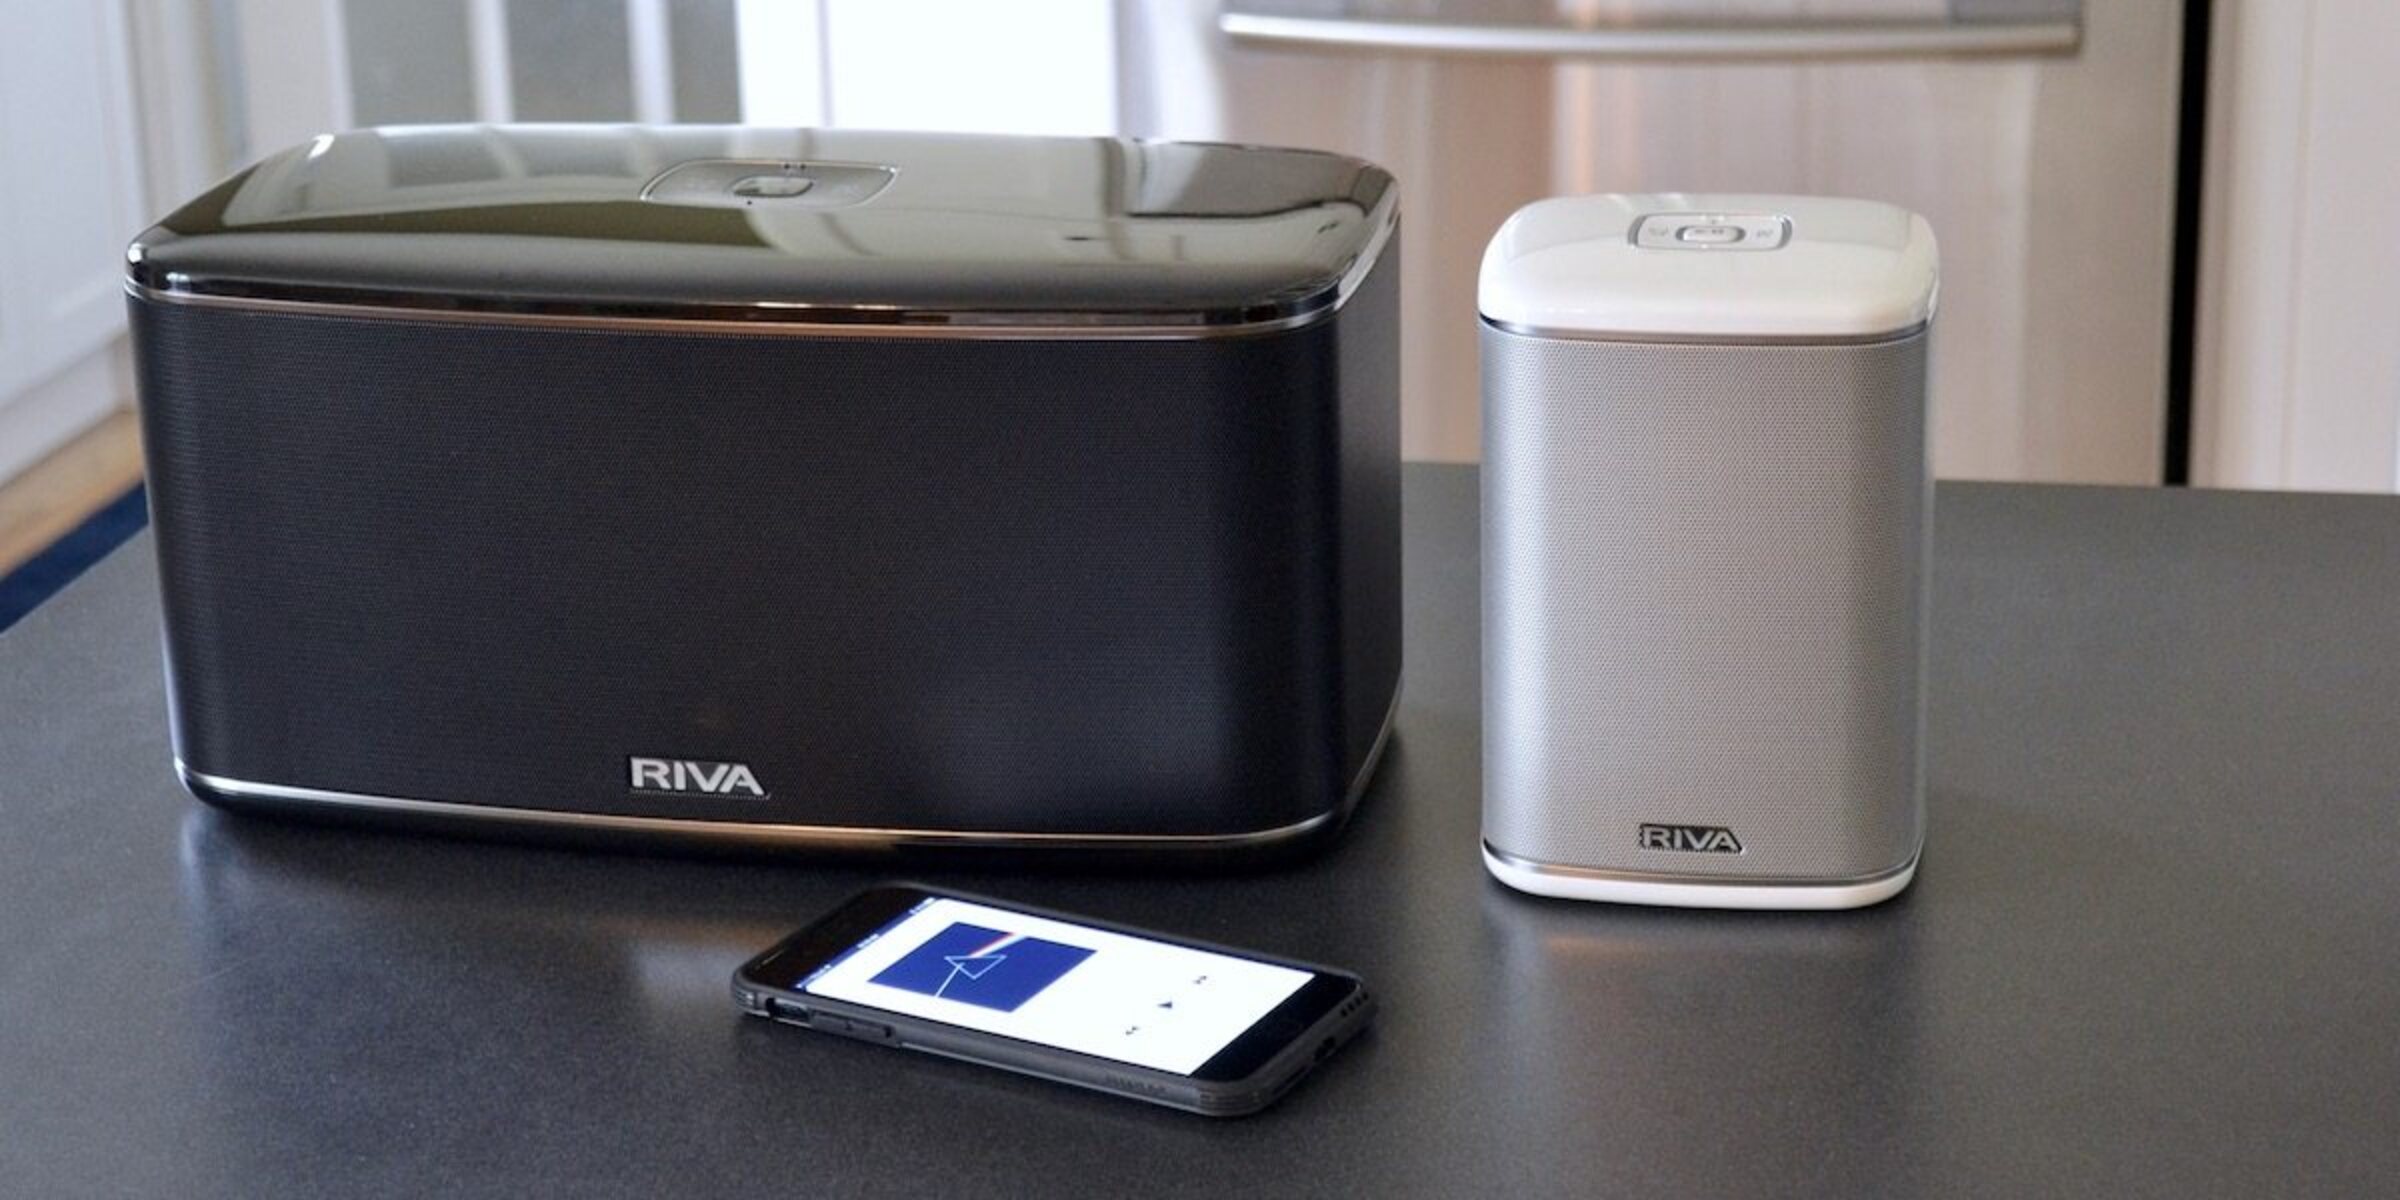 What Does The Riva Premium Wireless Smart Speaker System Come With?